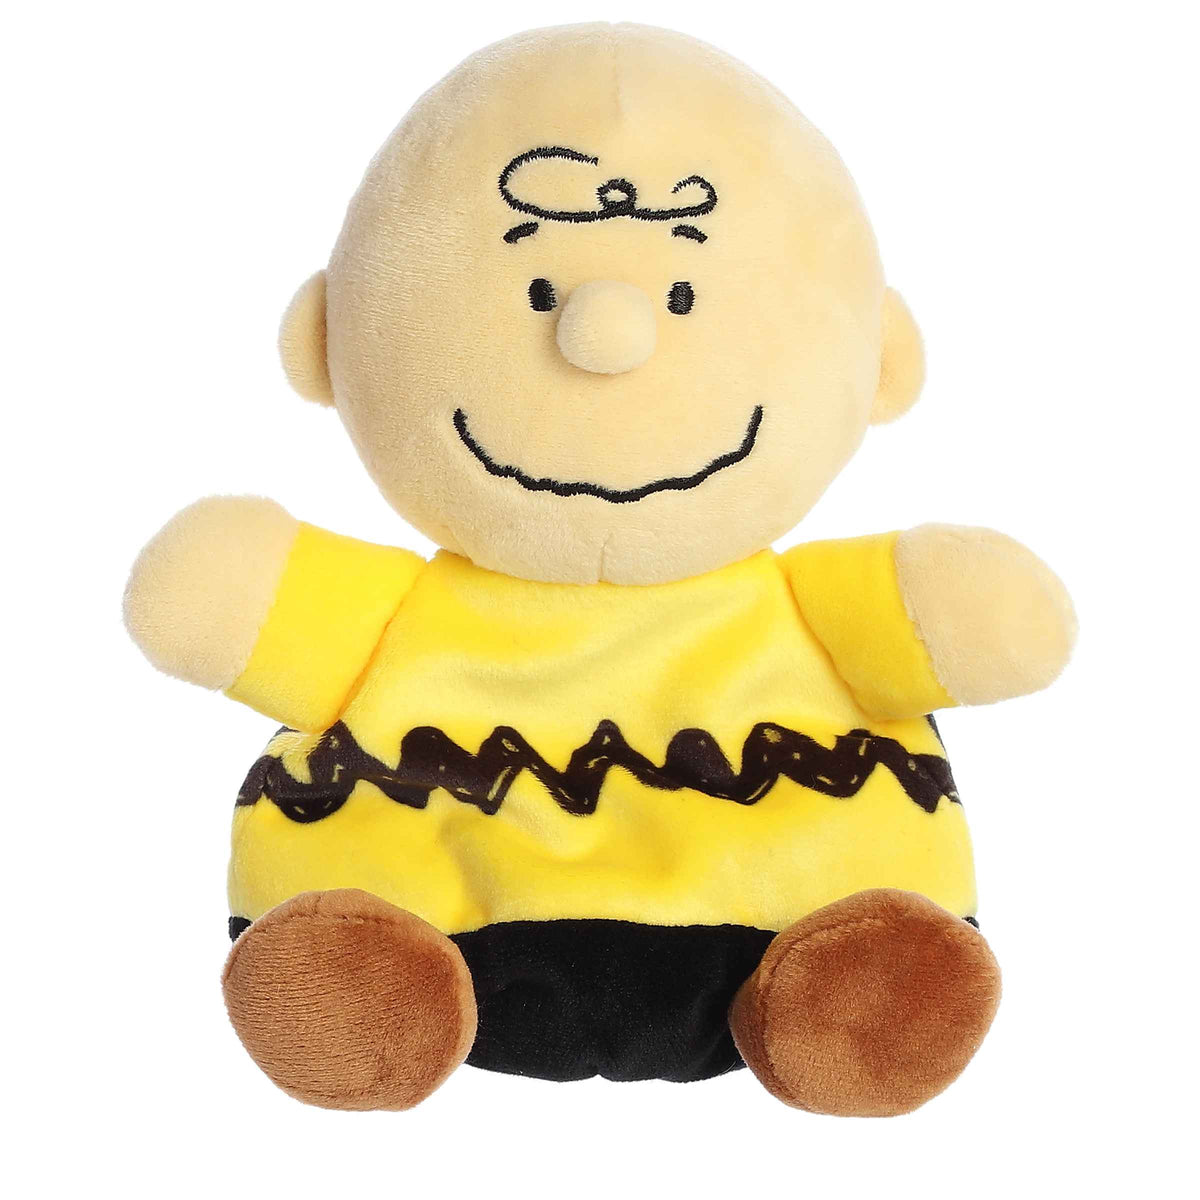 Charlie Brown Palm Pals plush from the Peanuts collection, yellow shirt with black zigzag, friendly smile